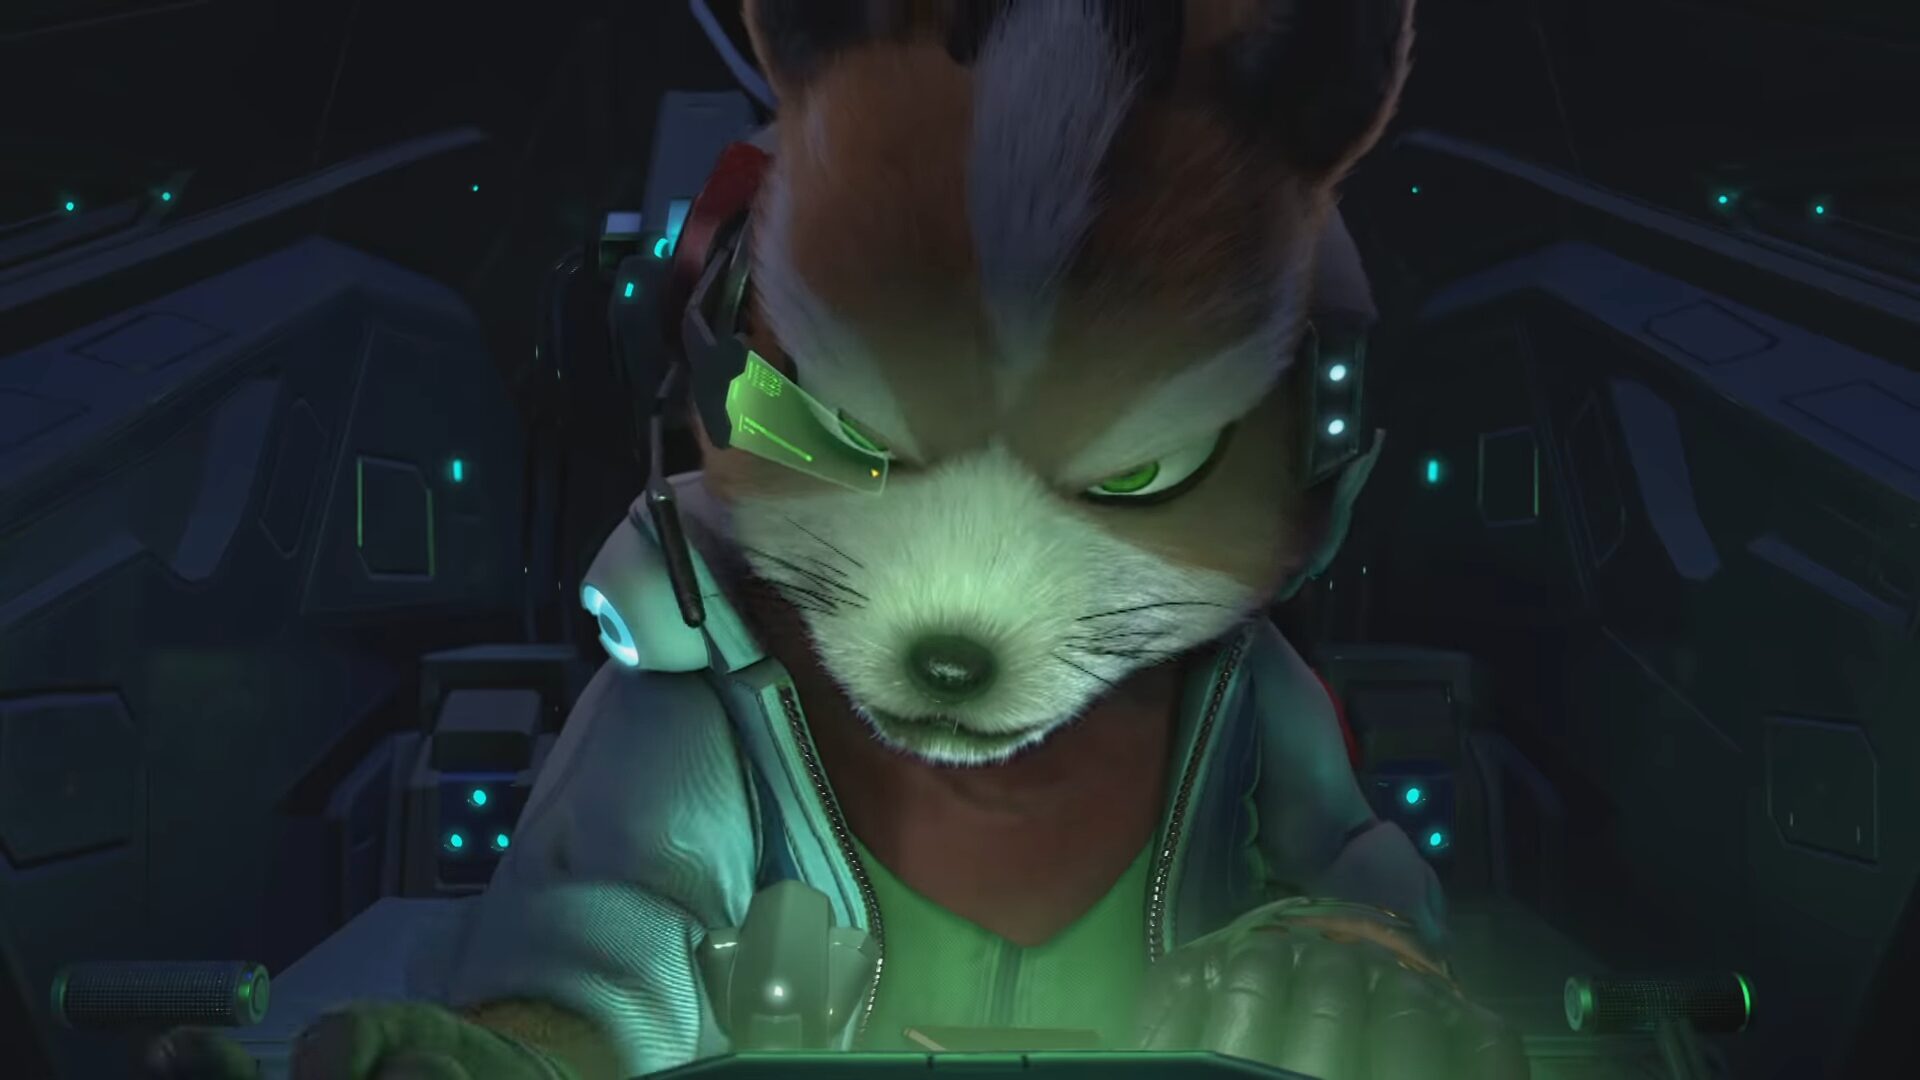 Starlink Producer Explains the Star Fox Connection